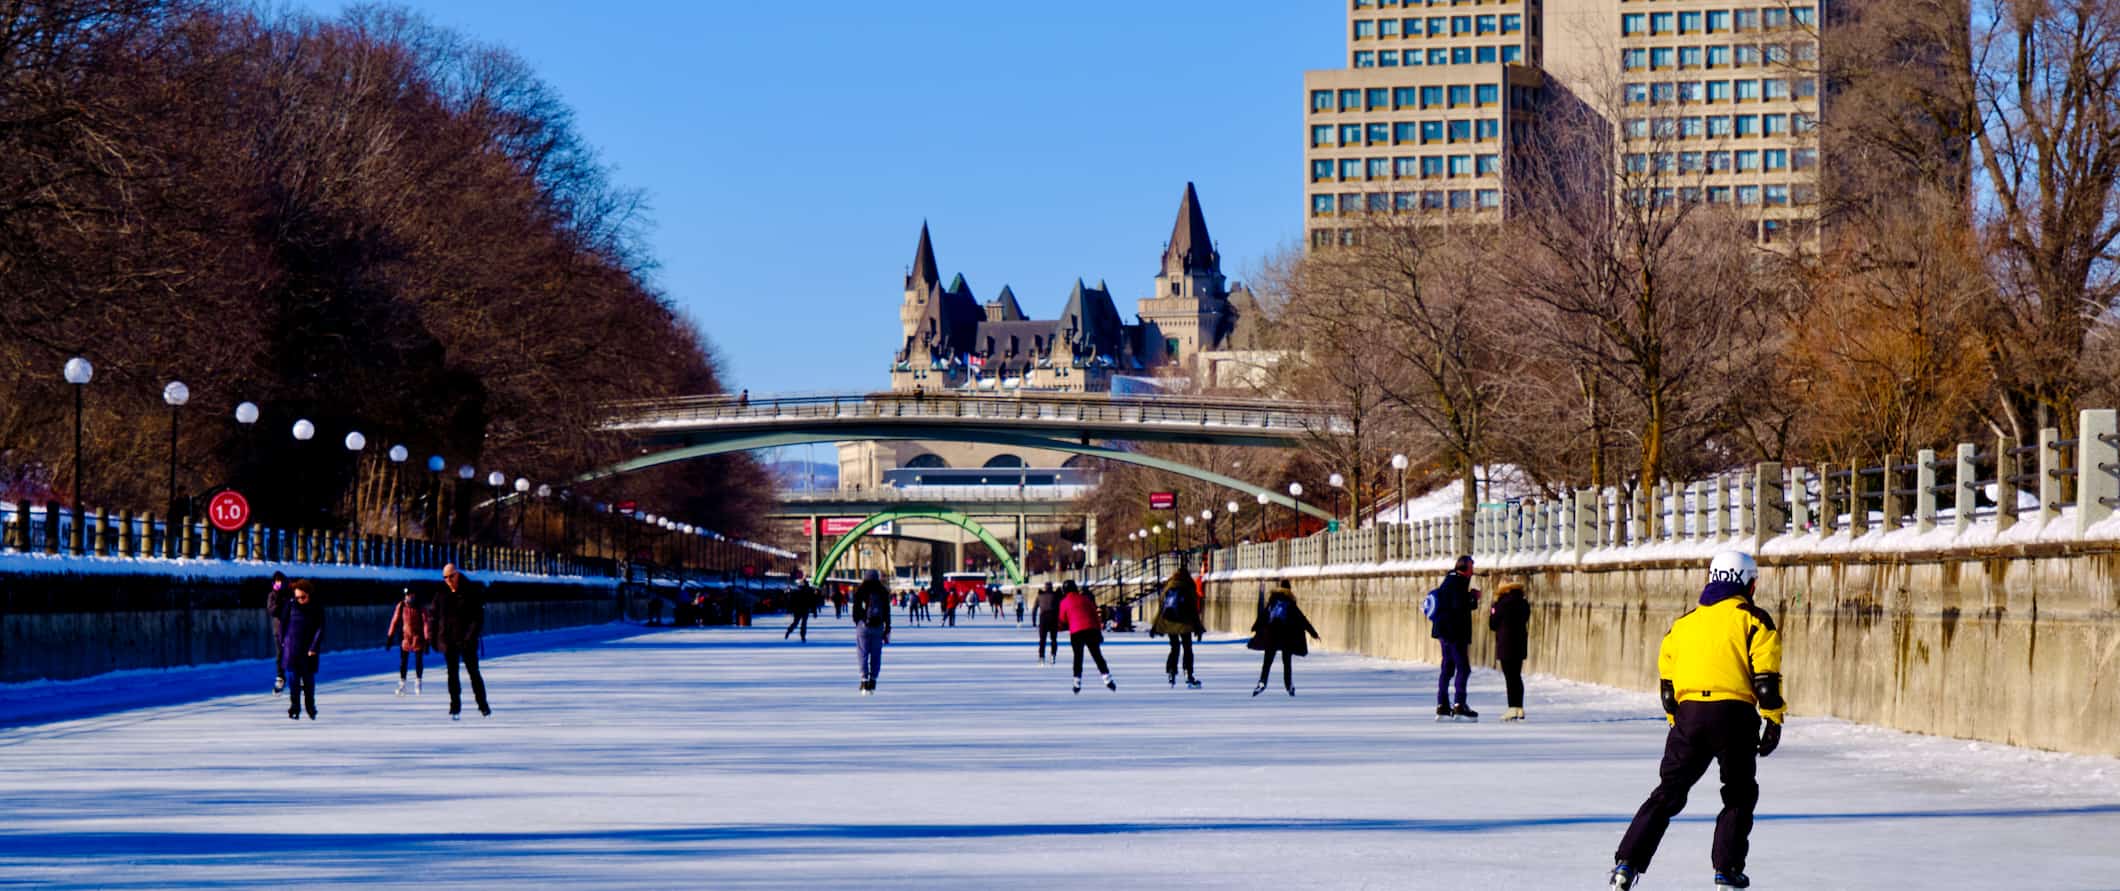 People skating on the frozen Rideau Canal in sunny Ottawa, Canada during the winter